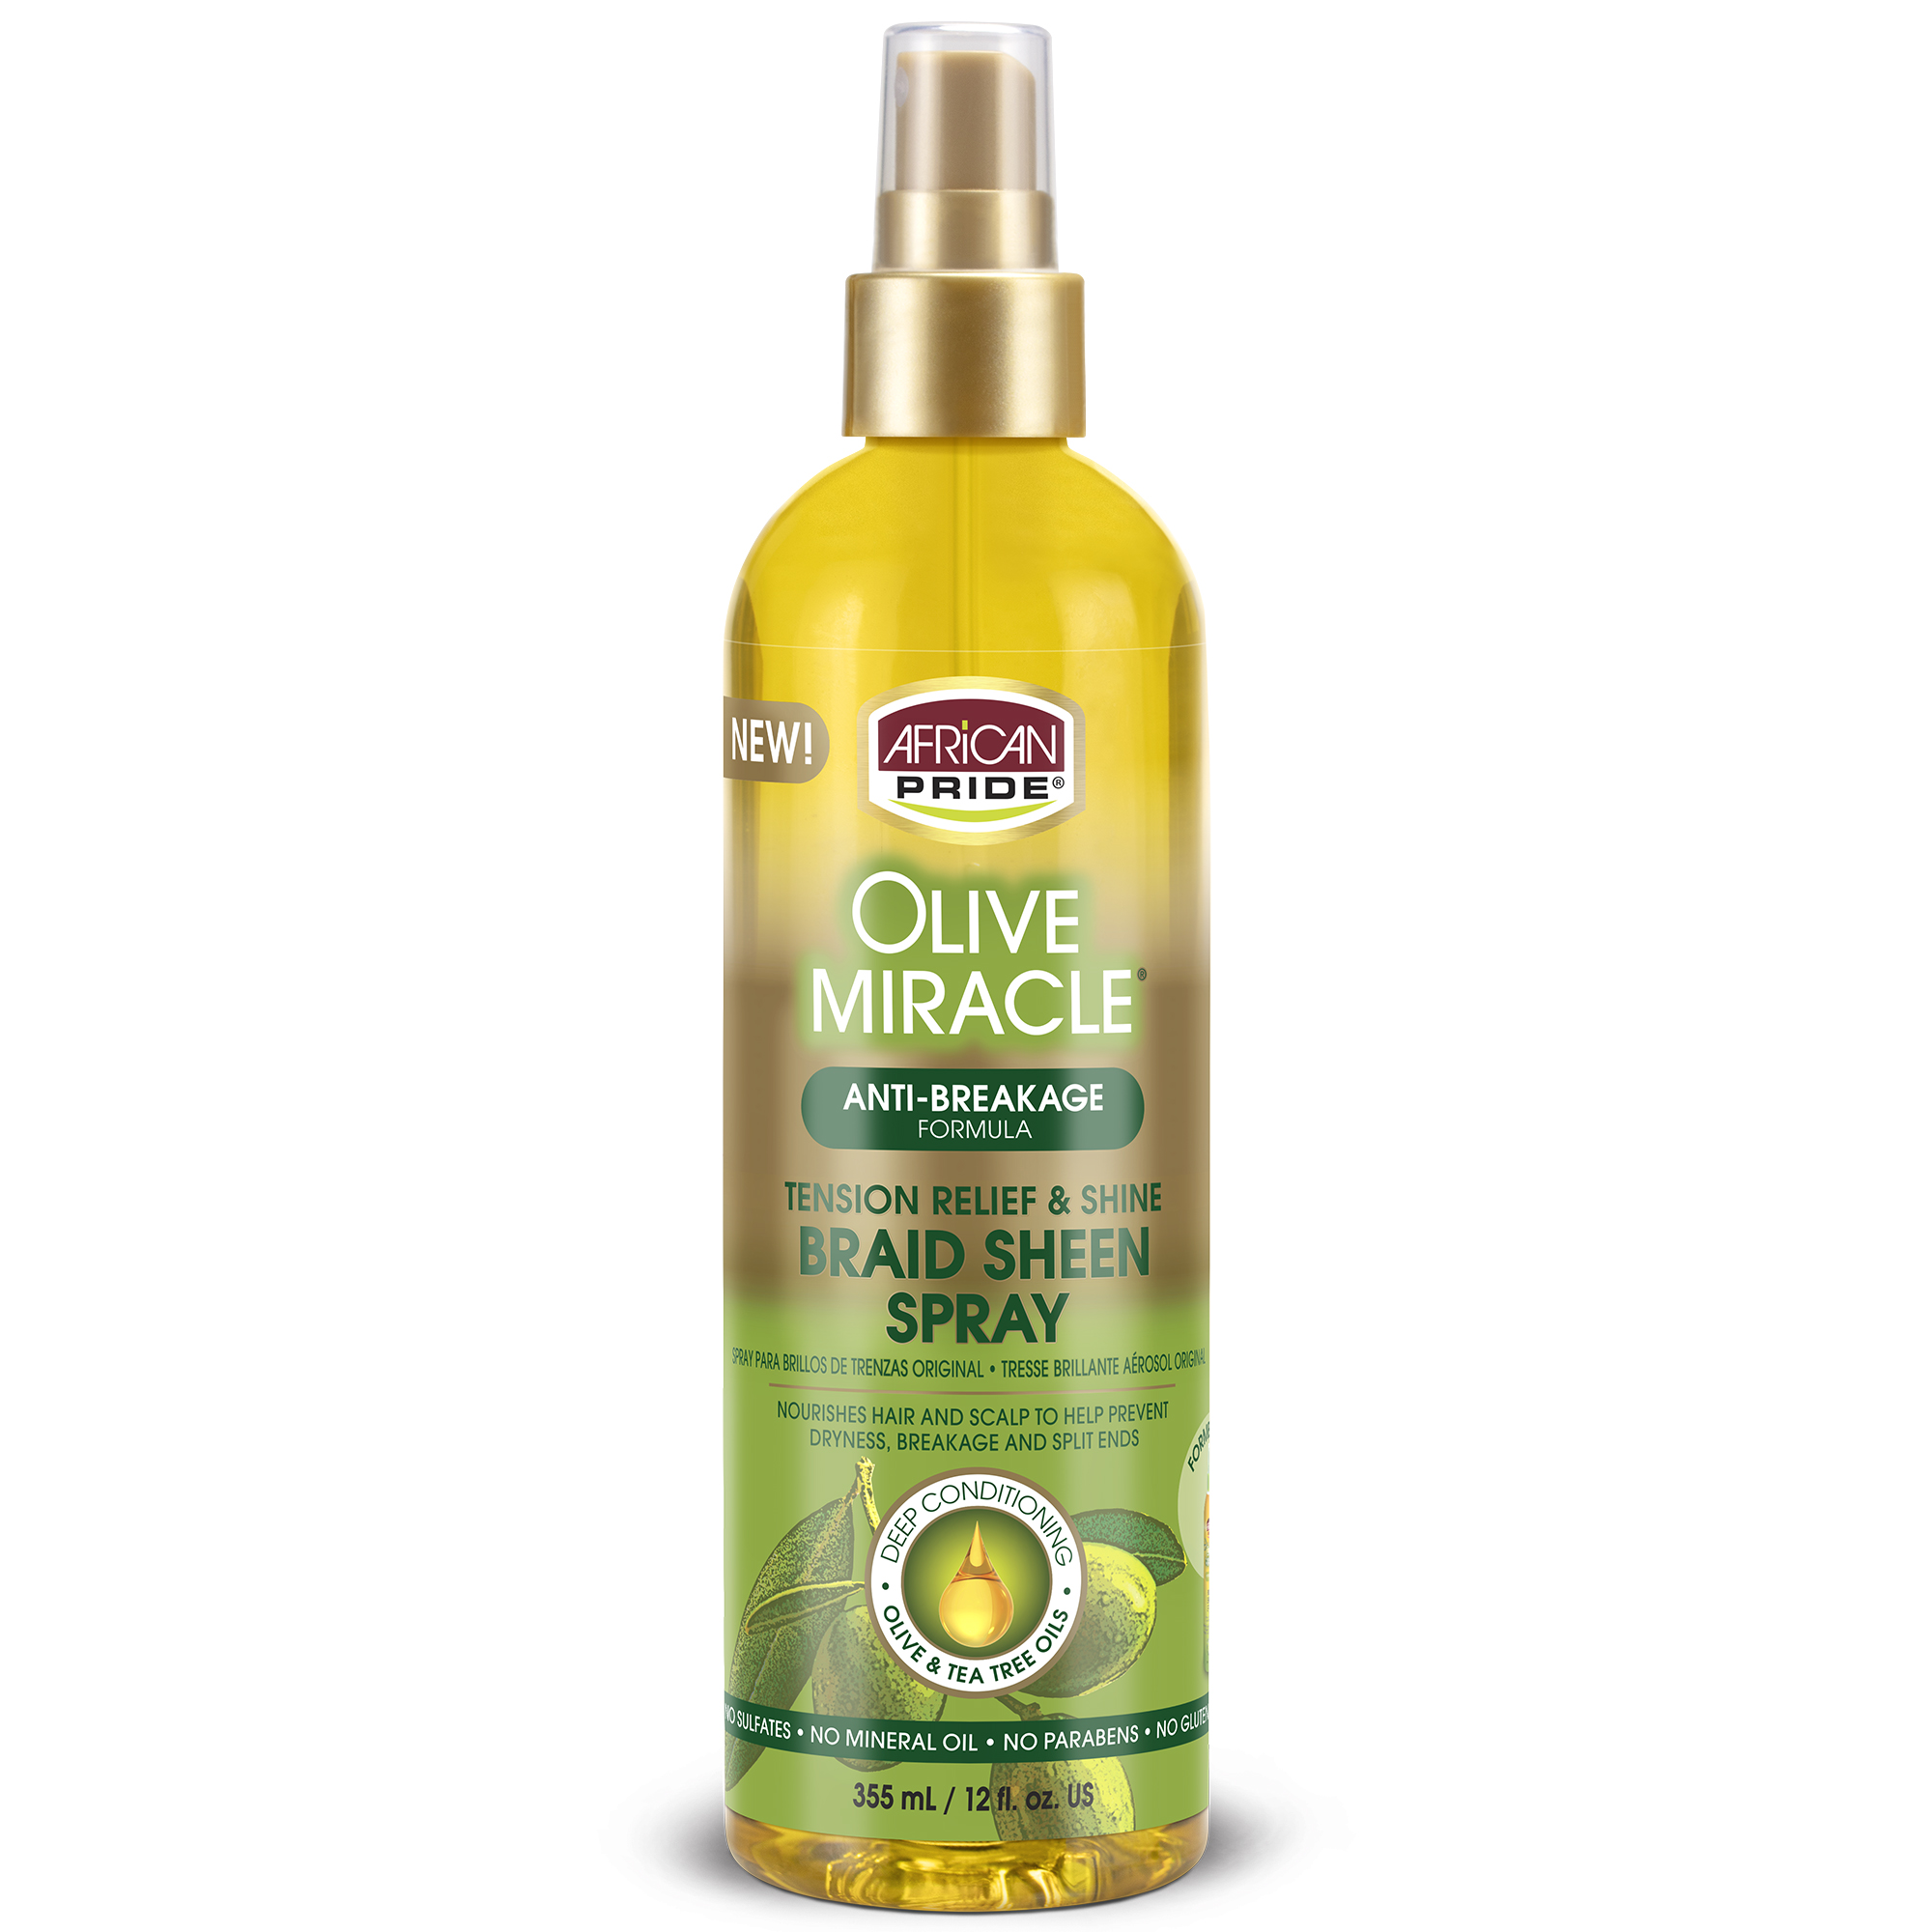 African Pride Olive Miracle Braid Sheen Spray : Tension Relief And Shine